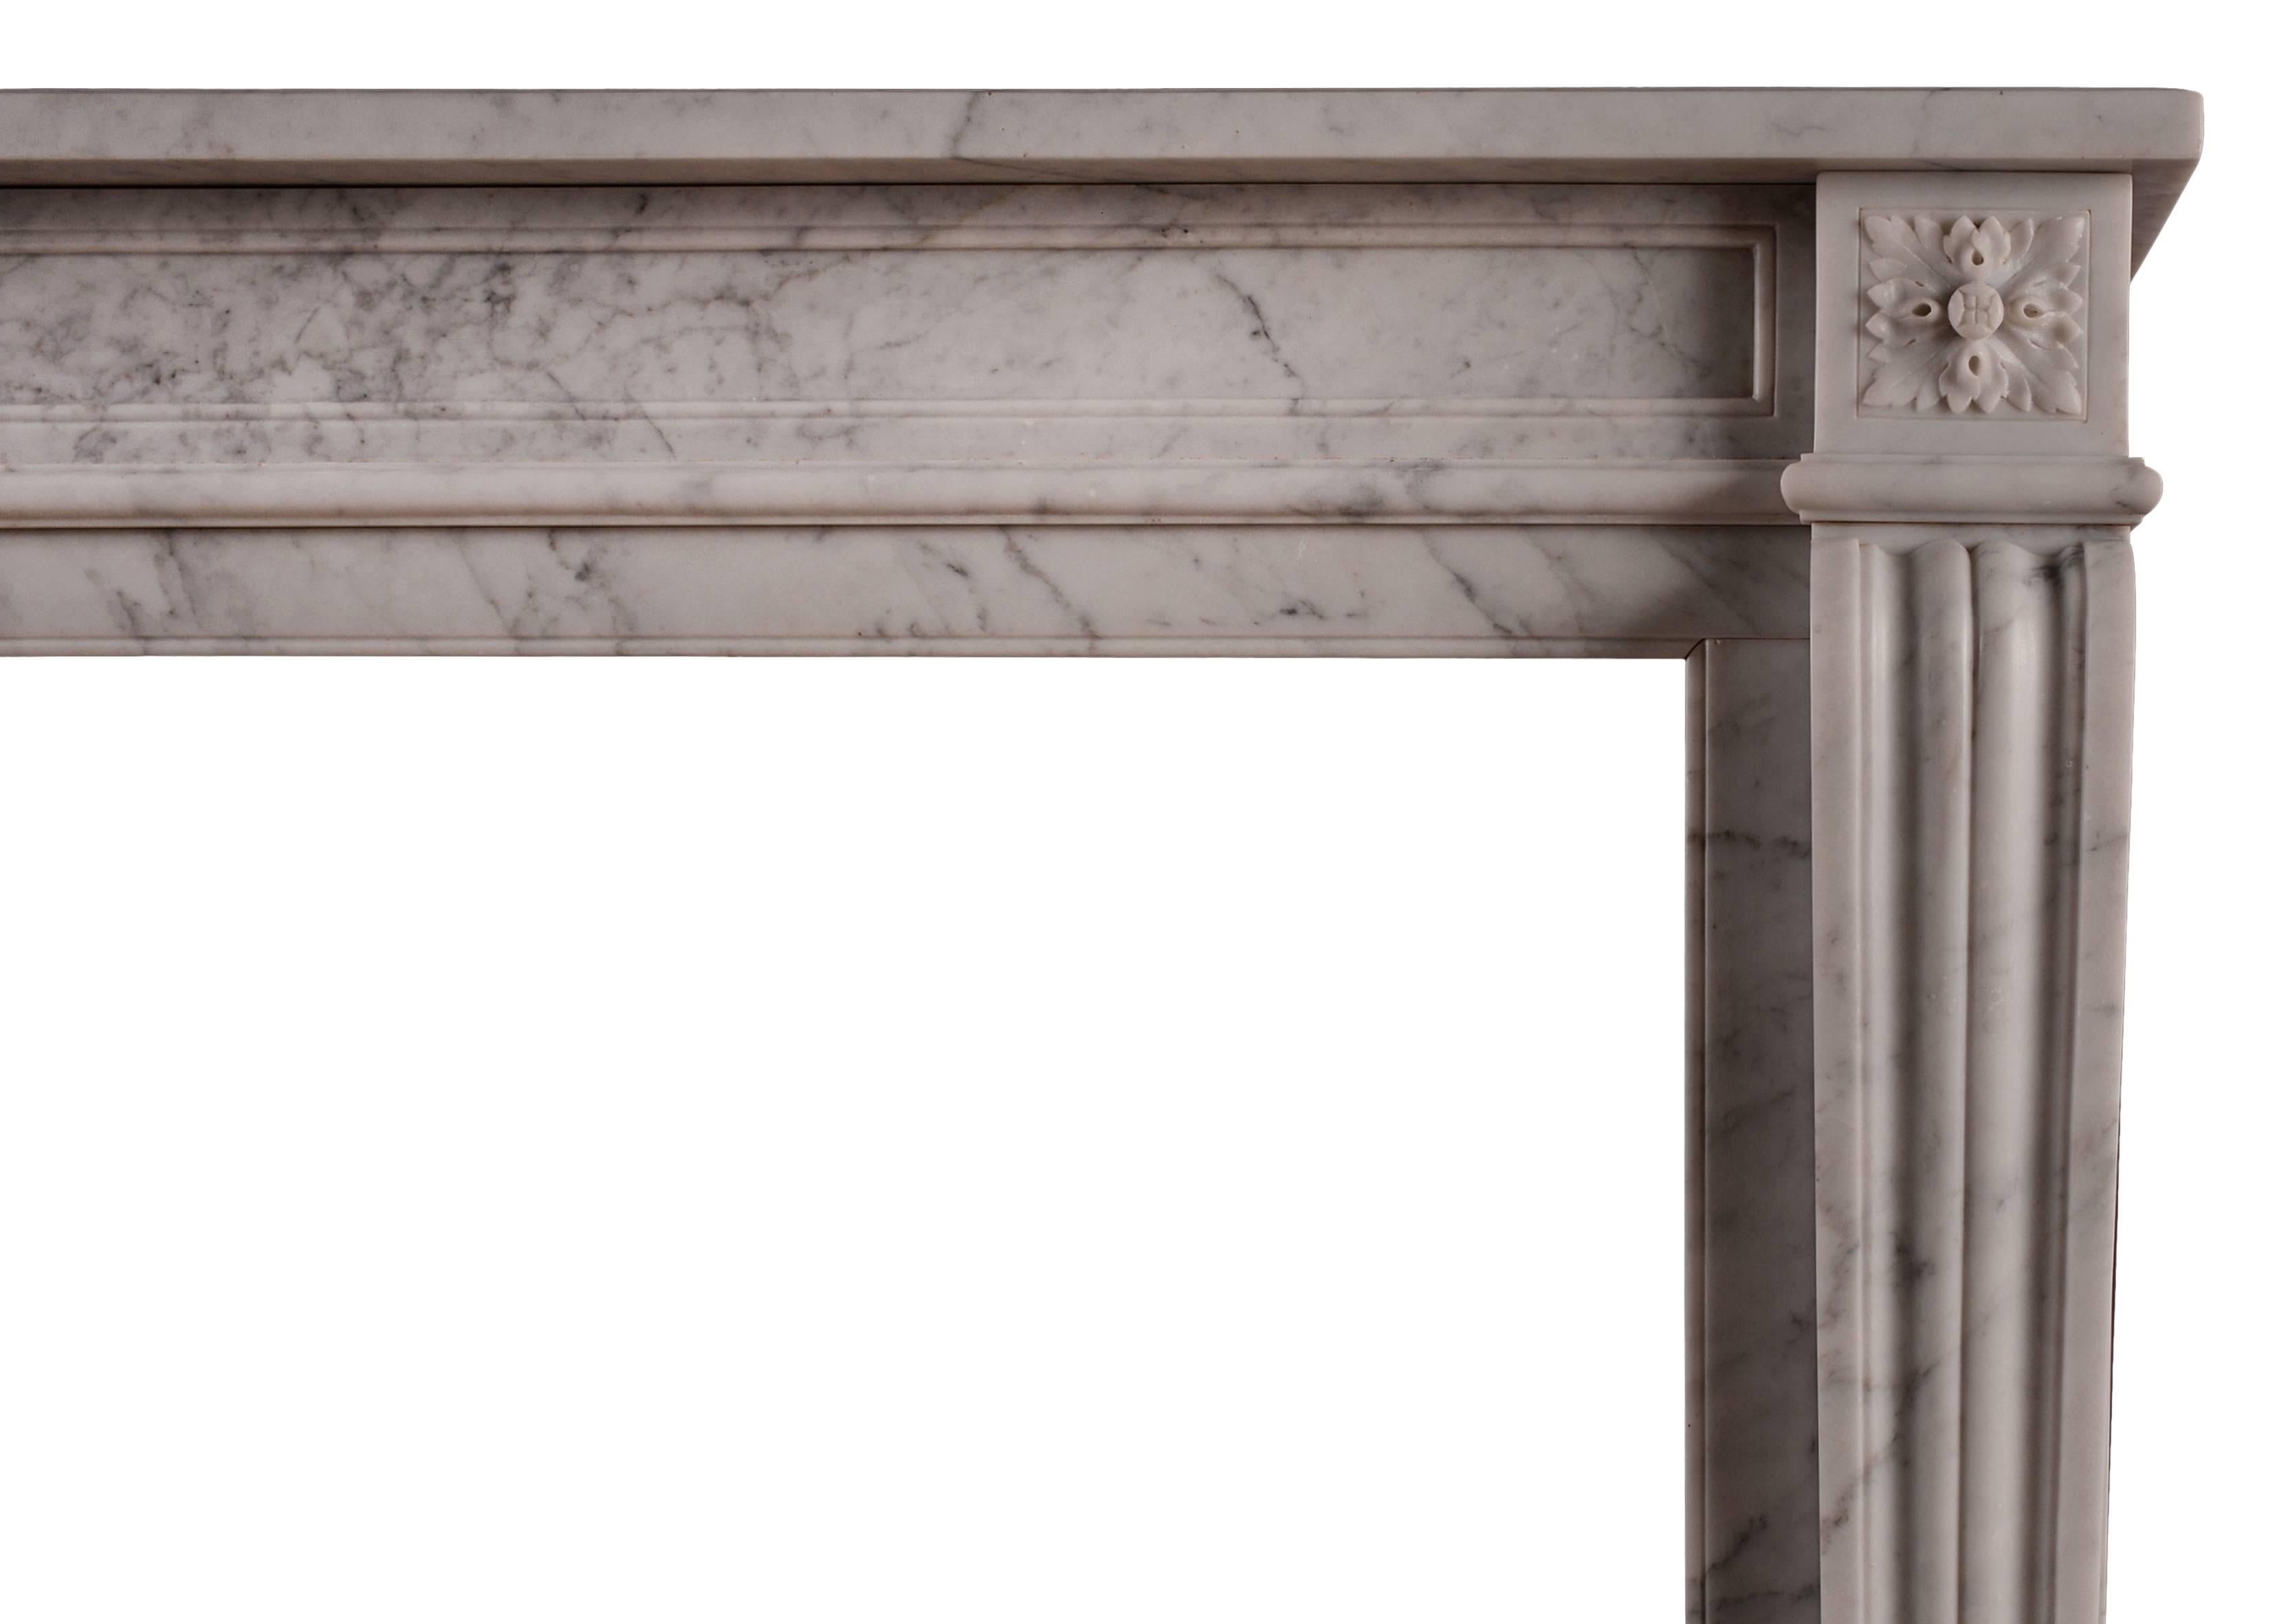 A Carrara marble fireplace in the Louis XVI manner. The shaped jambs with flutes throughout, surmounted by square carved paterae. Panelled frieze, surmounted by plain shelf. A restrained and elegant piece with good proportions for a study or smaller